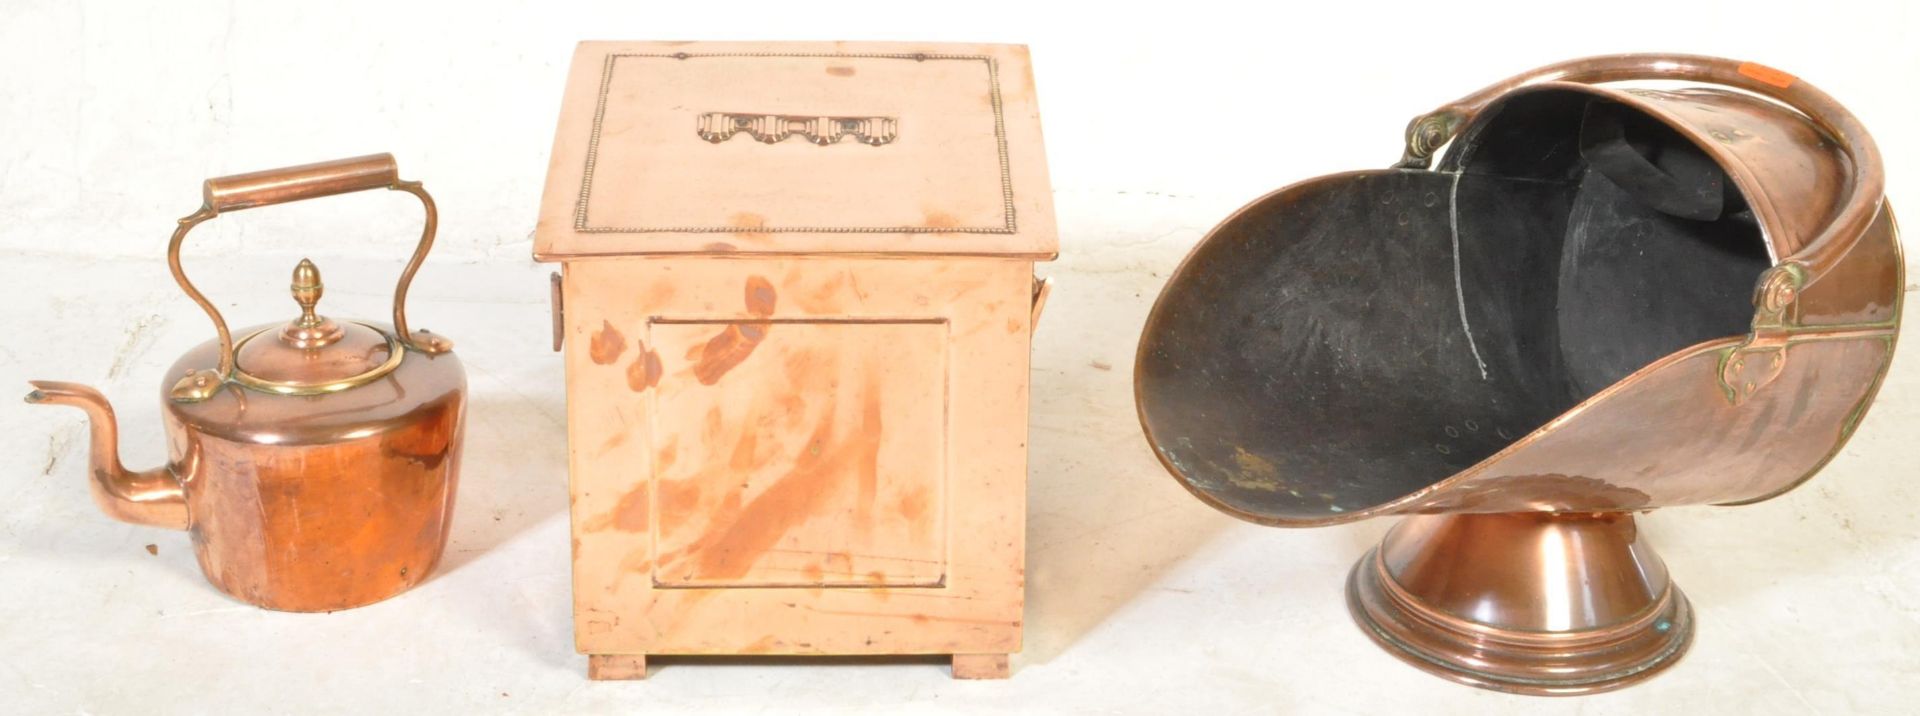 EARLY 20TH CENTURY ART DECO COPPER COAL BOX AND MORE